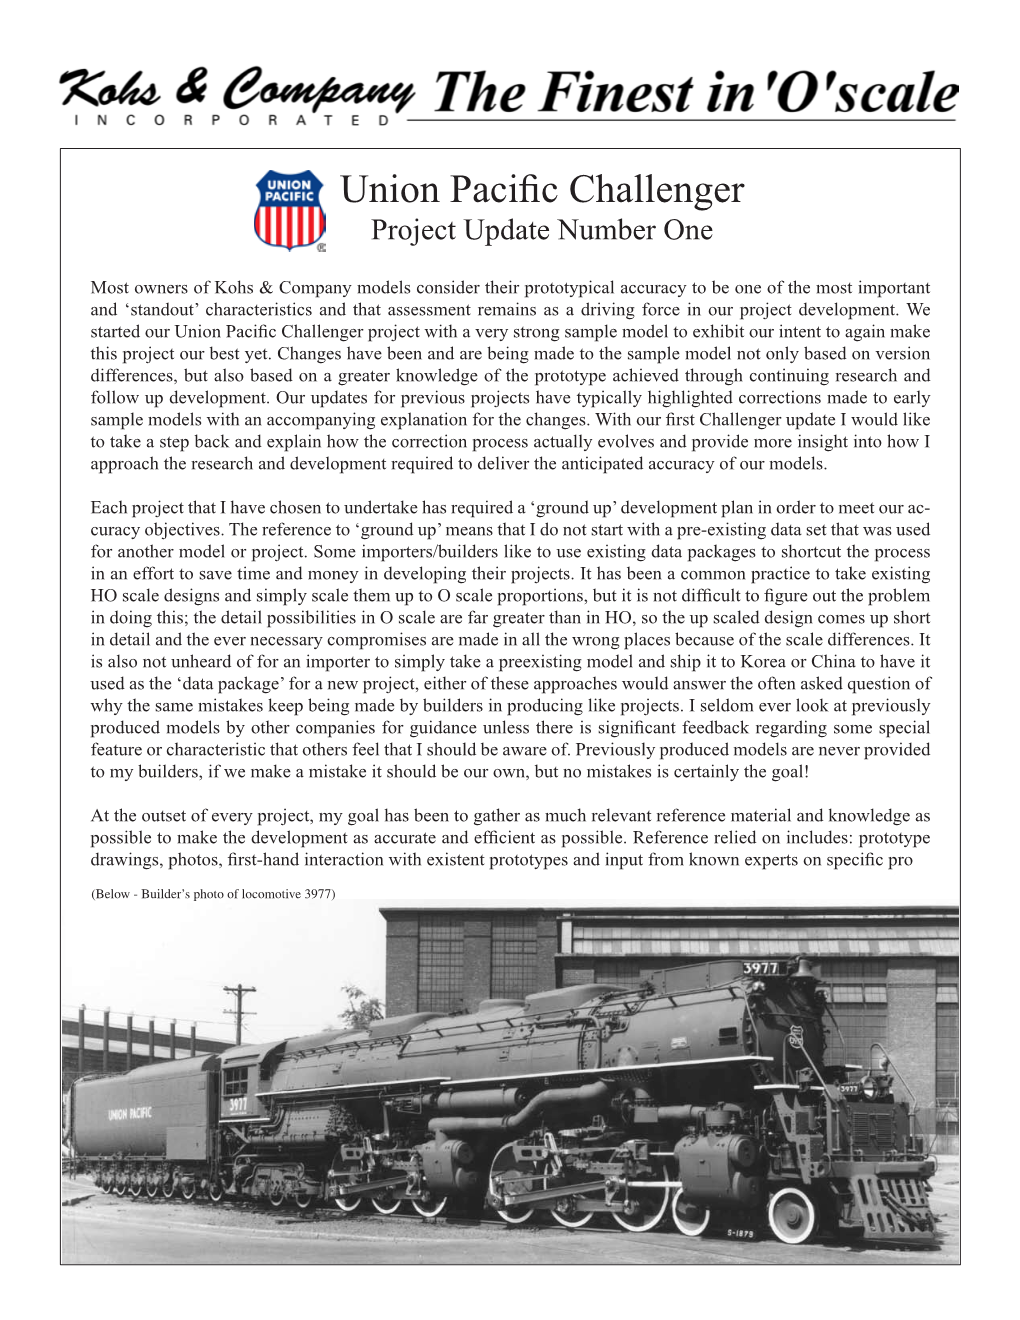 Union Pacific Challenger Project Update Number One